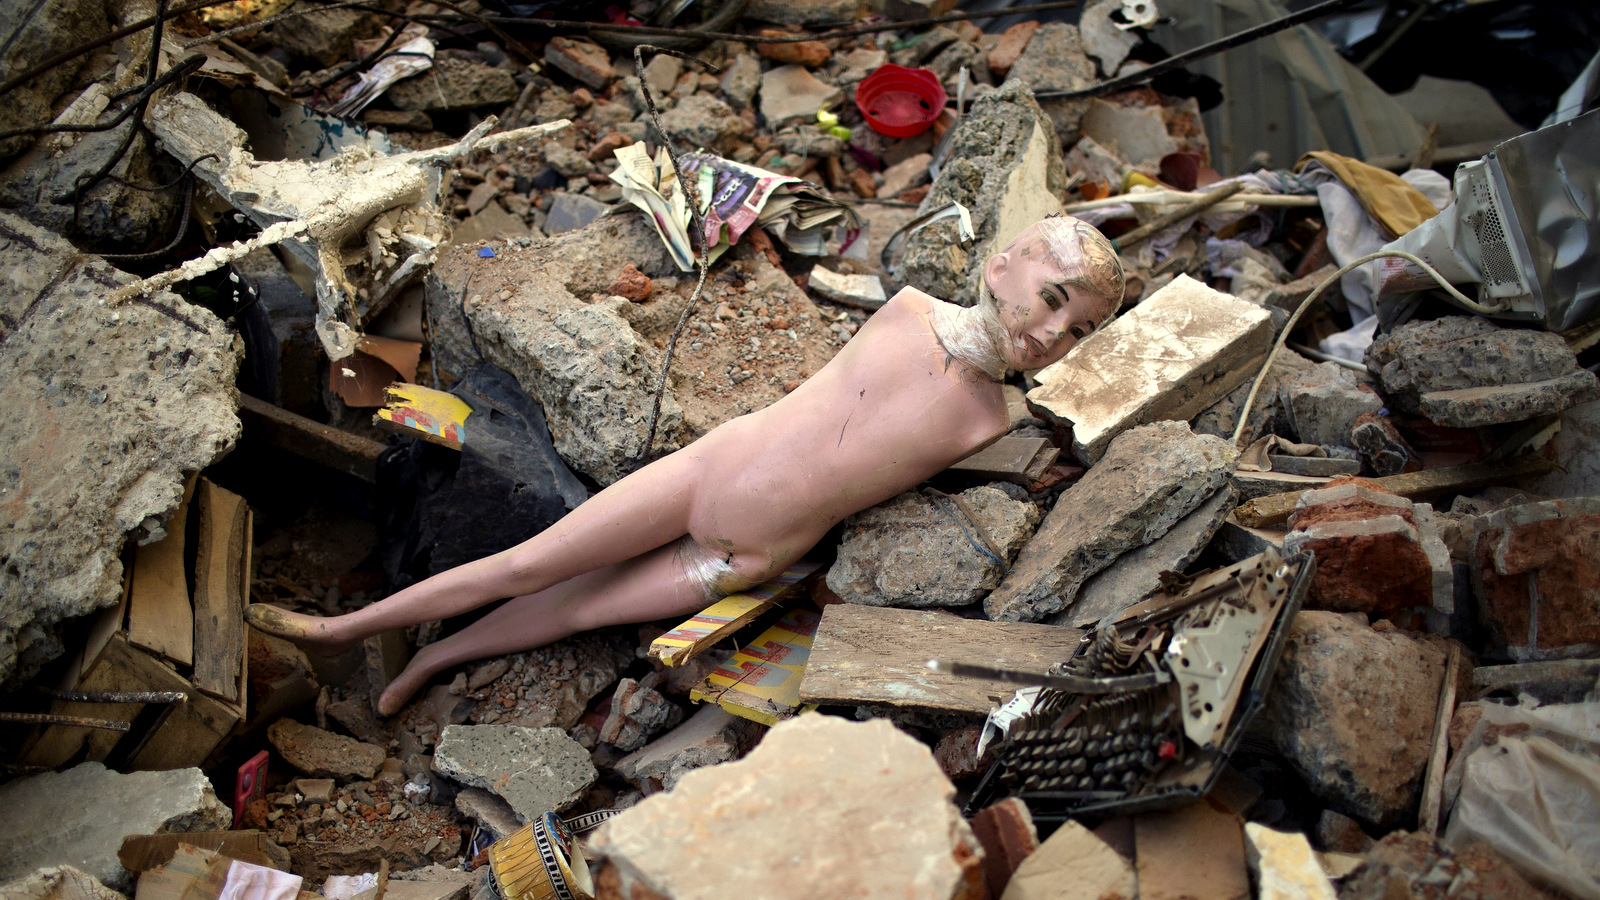 A mannequin lies amid the rubble caused by a 7.8-magnitude earthquake, in La Chorrera, Ecuador, Monday, April 18, 2016. The Saturday night quake left a trail of ruin along Ecuador’s normally placid Pacific Ocean coast. At least 350 people died and thousands are homeless. President Rafael Correa said early Monday that the death toll would “surely rise, and in a considerable way.” (AP Photo/Rodrigo Abd)